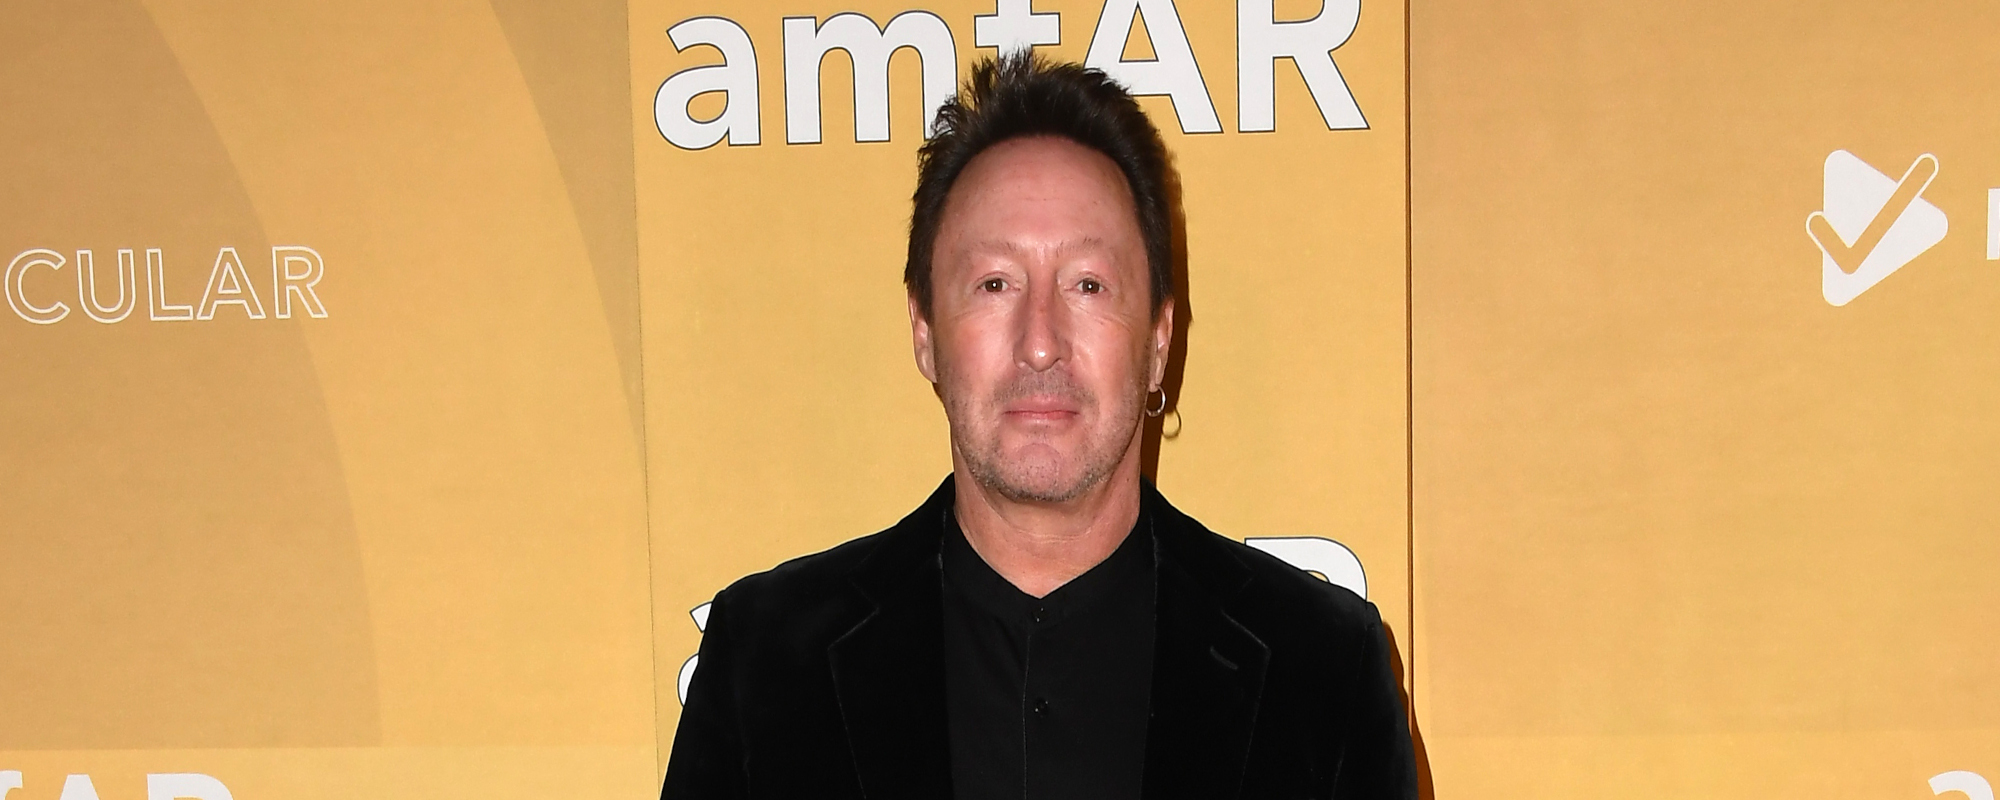 Julian Lennon Runs into “Uncle Paul” McCartney in the Airport Lounge, Shares Photos